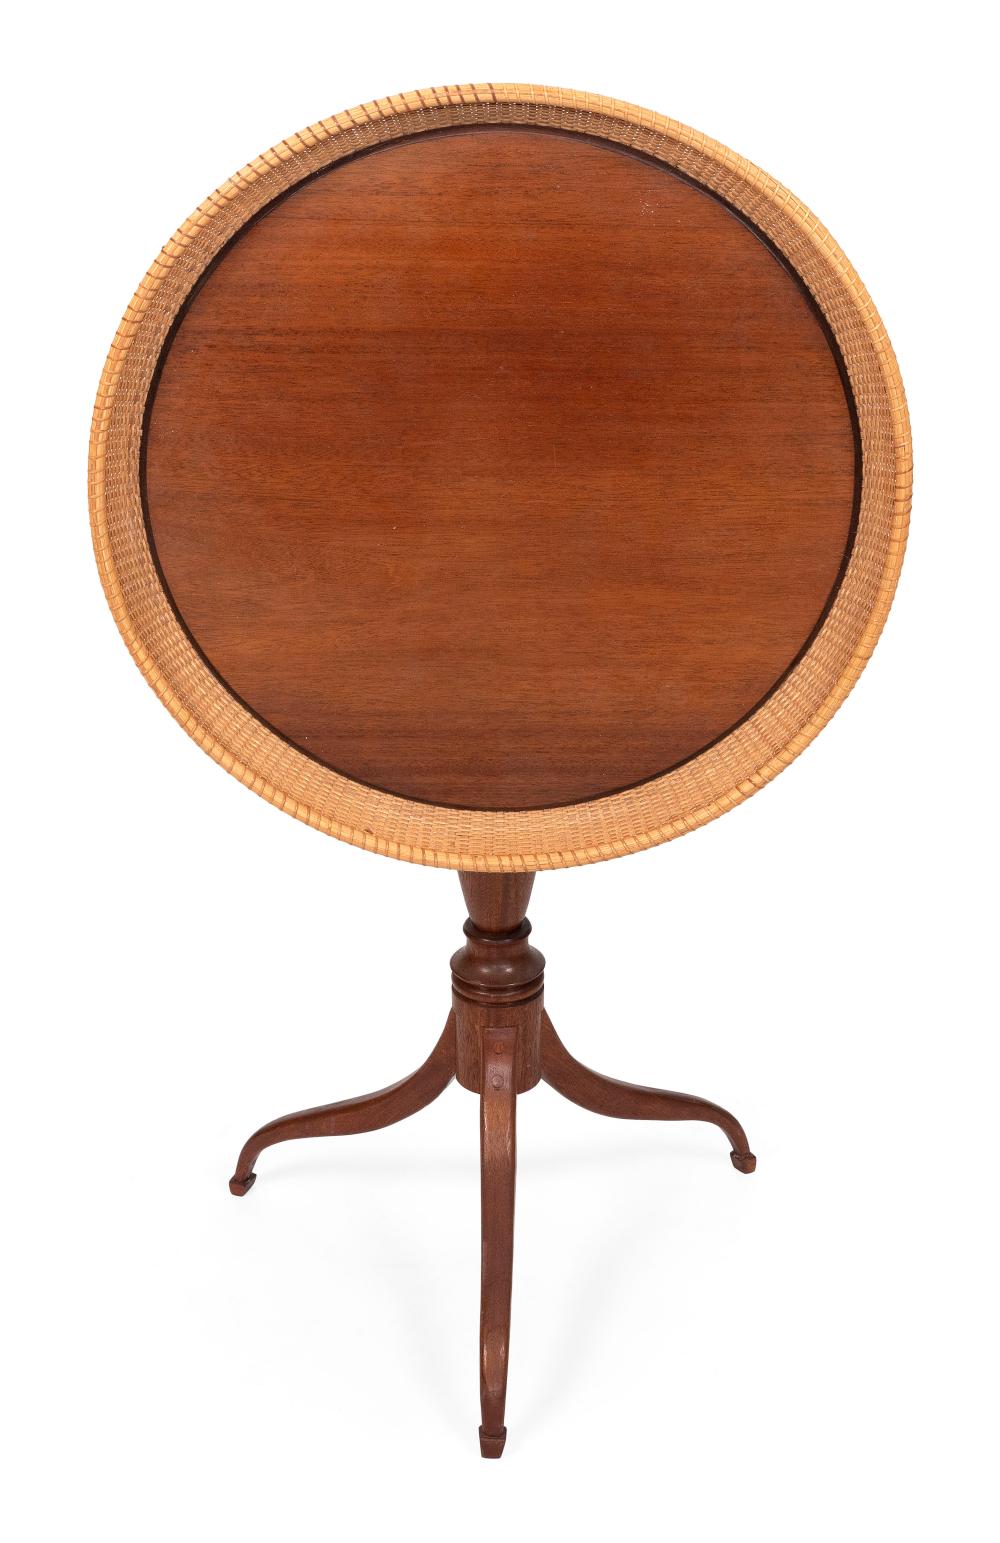 TILT TOP TABLE WITH ROUND NANTUCKET 34f612